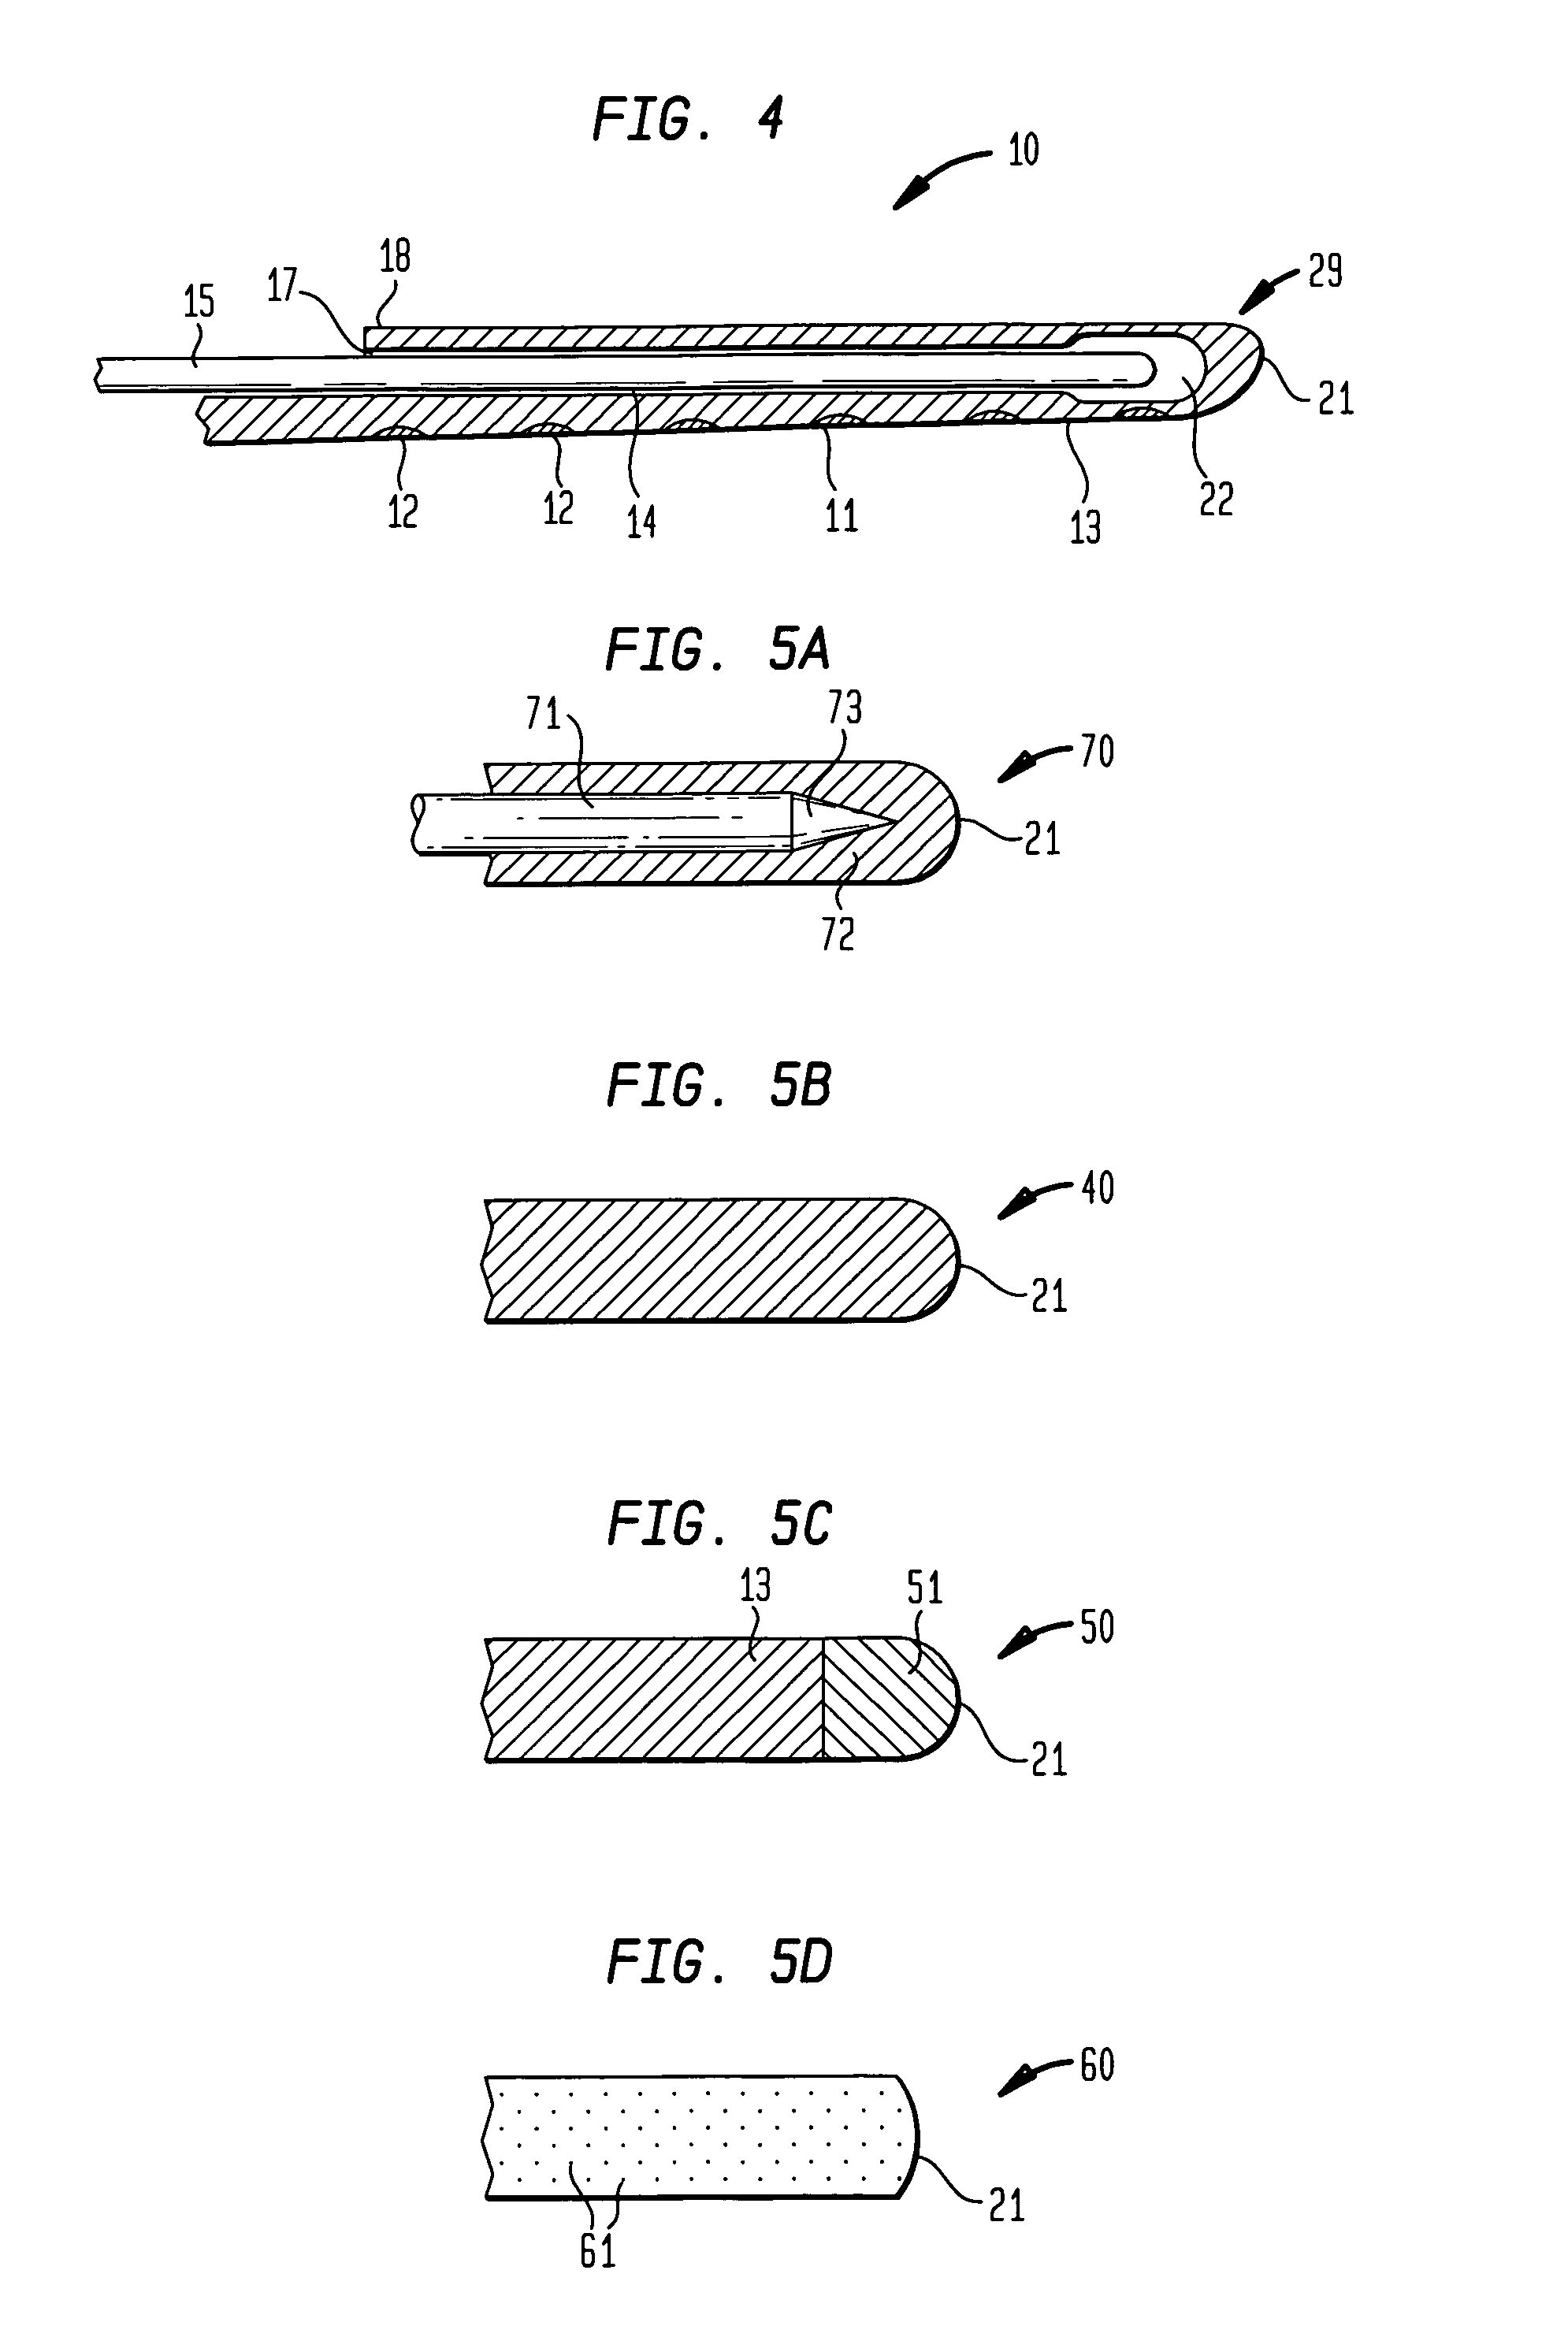 Combination stylet and straightening coating for a cochlear implant electrode array